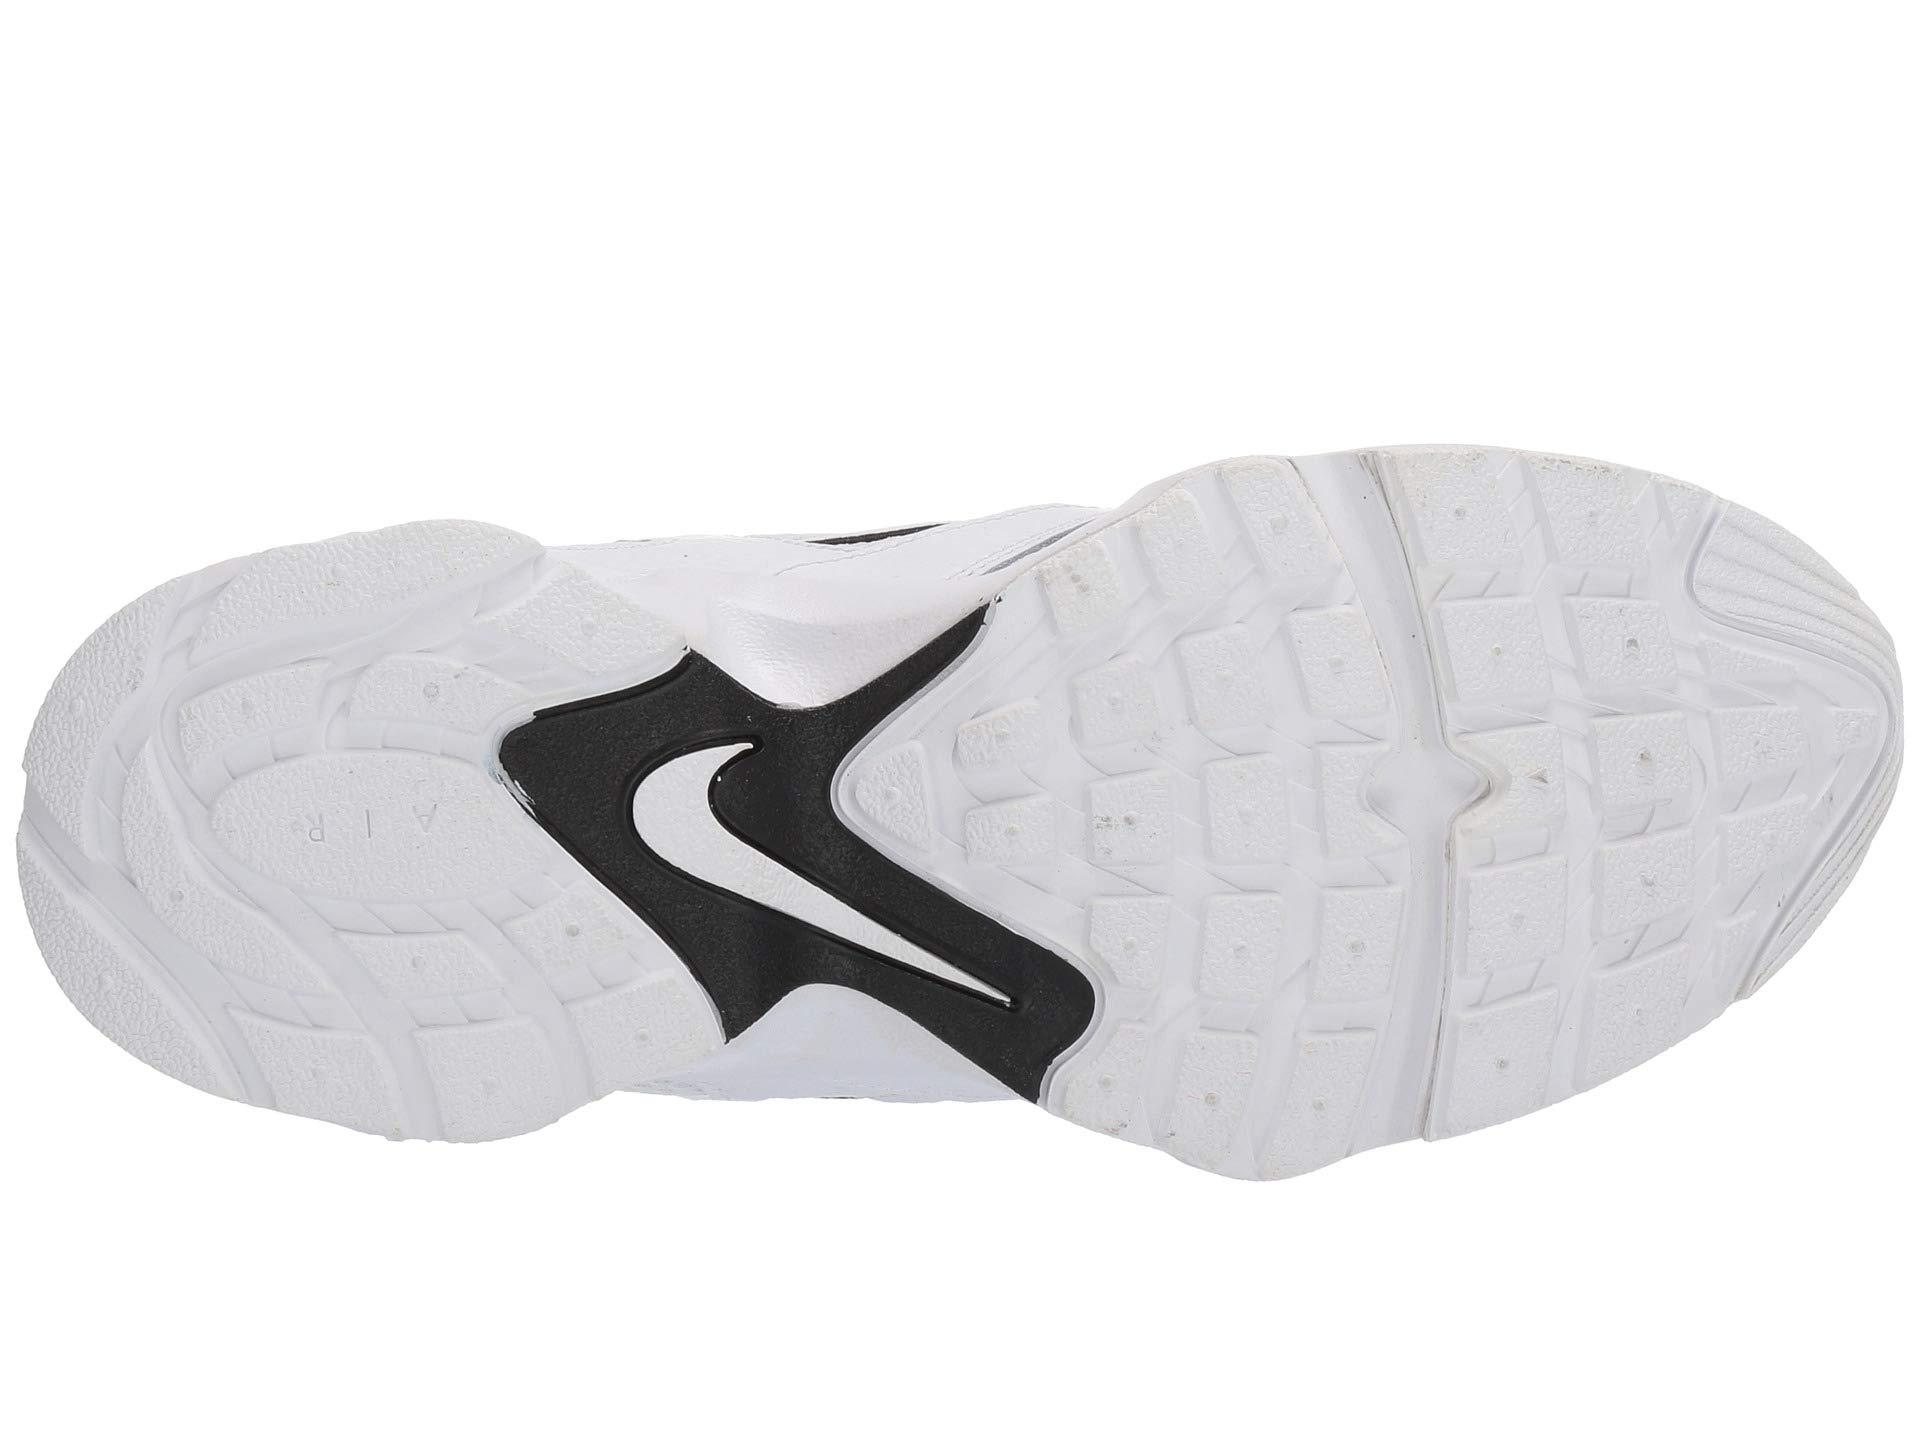 Nike Leather Air Heights in White/White/Black (White) - Lyst